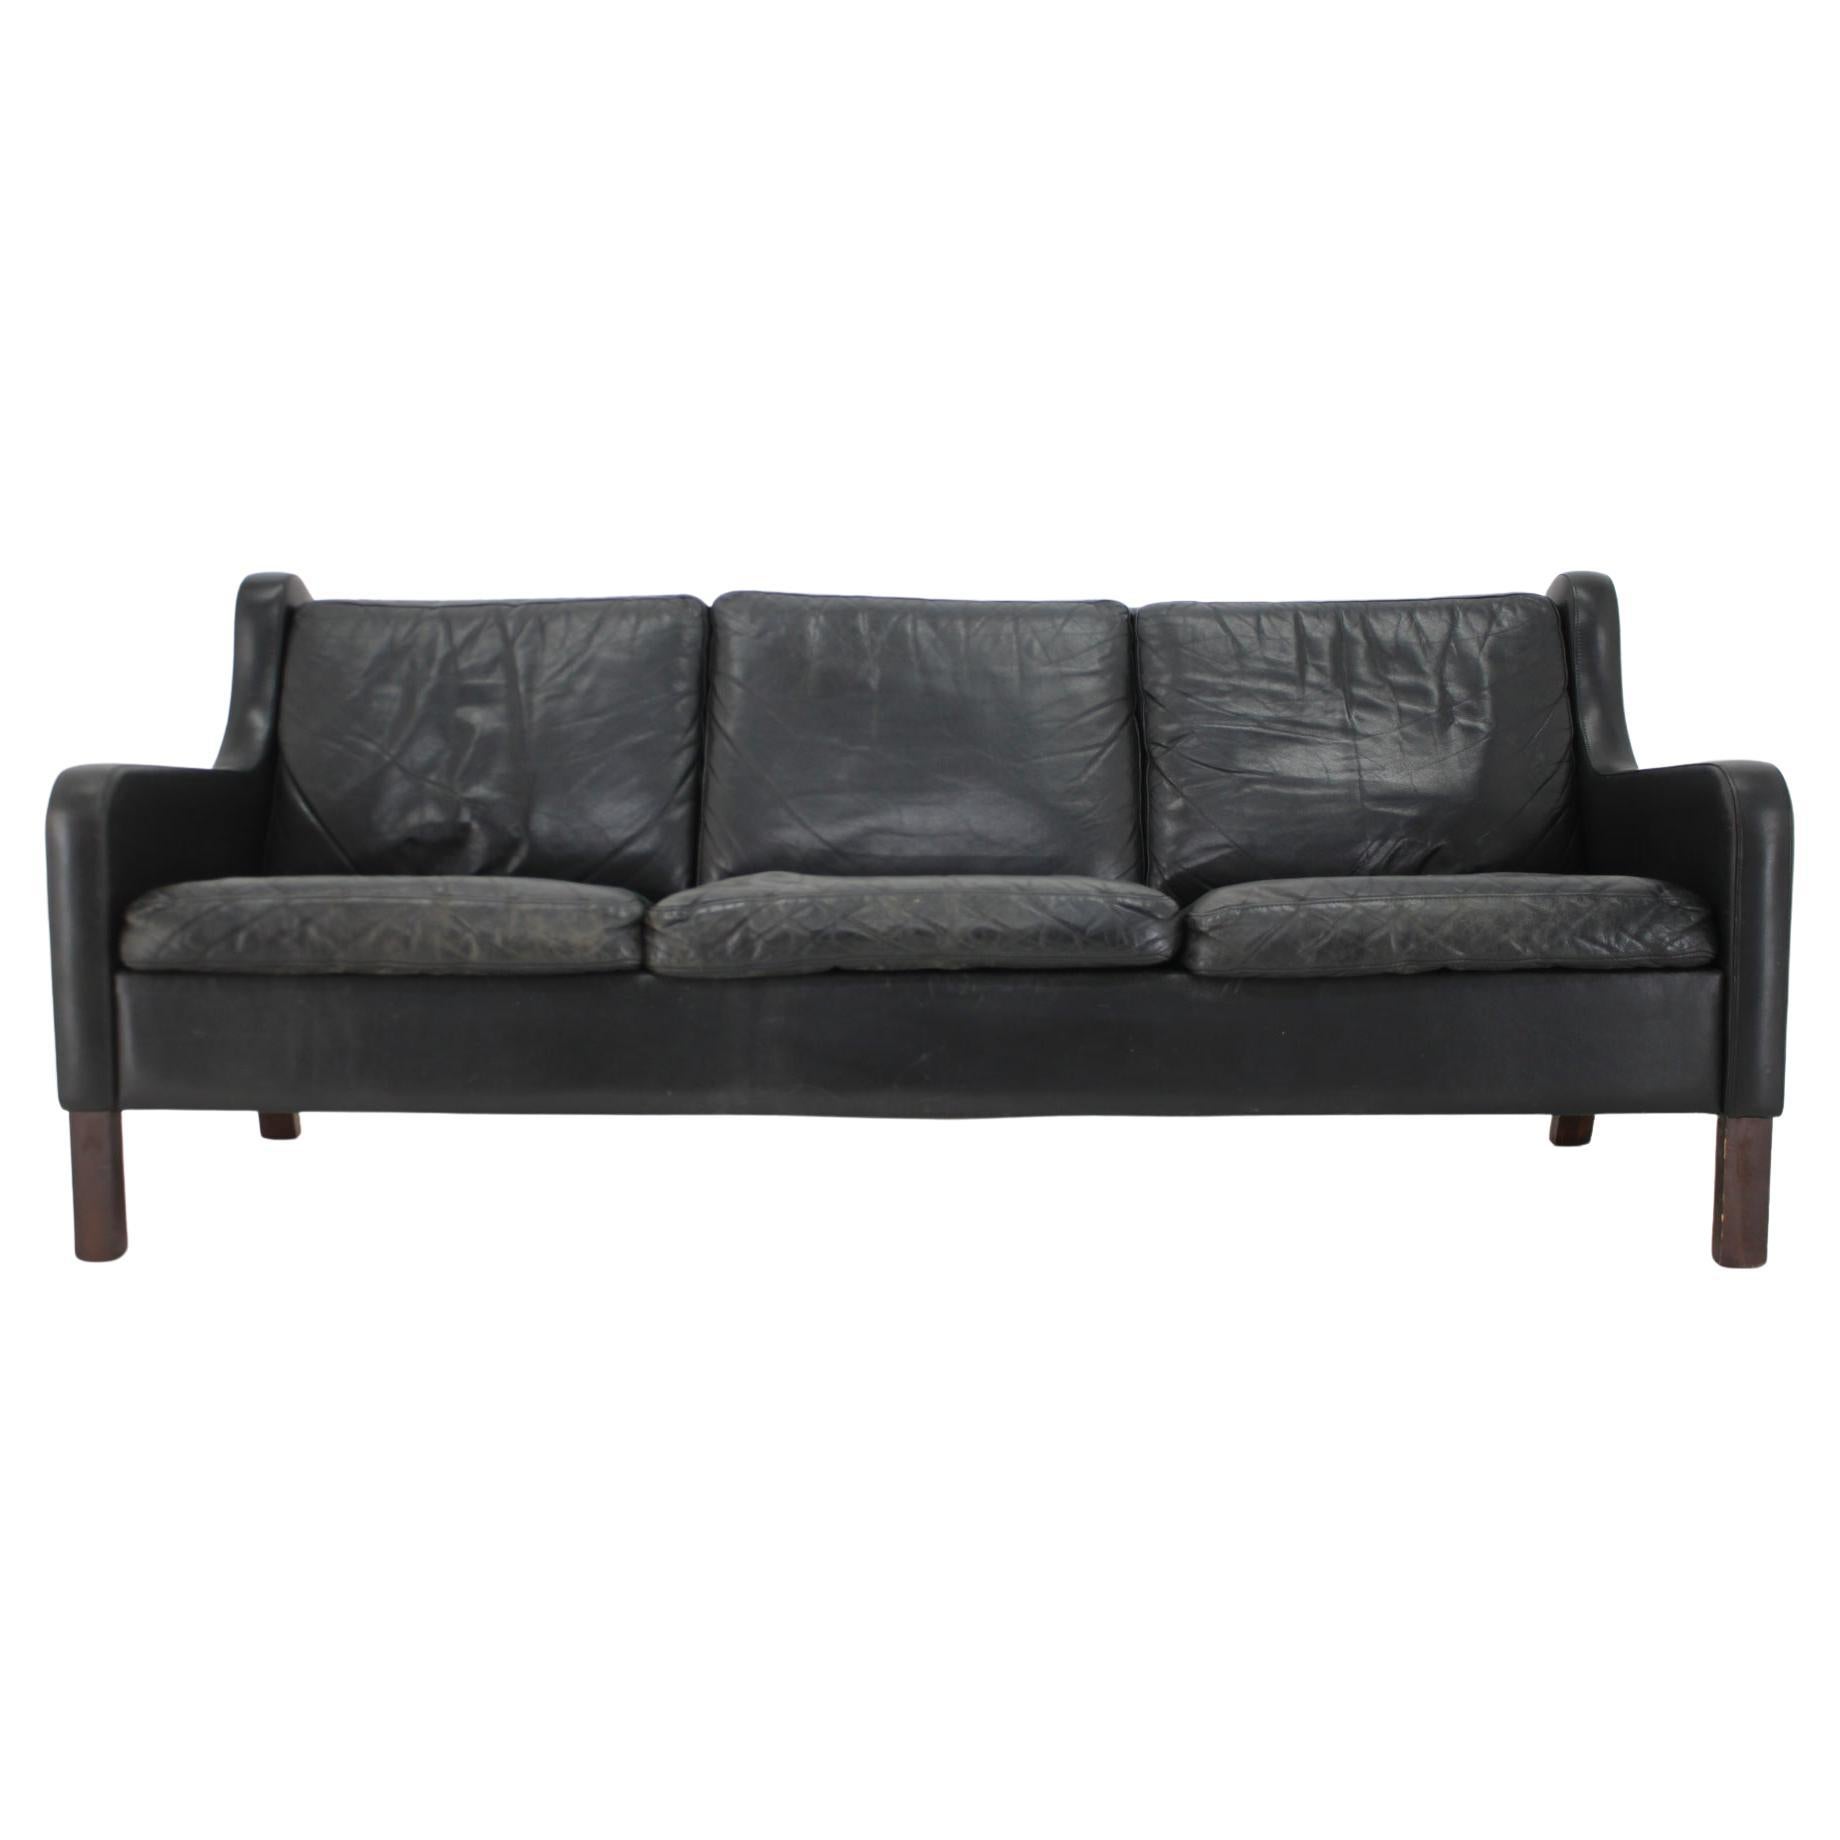 1970s Danish Black Leather 3-Seater Sofa For Sale